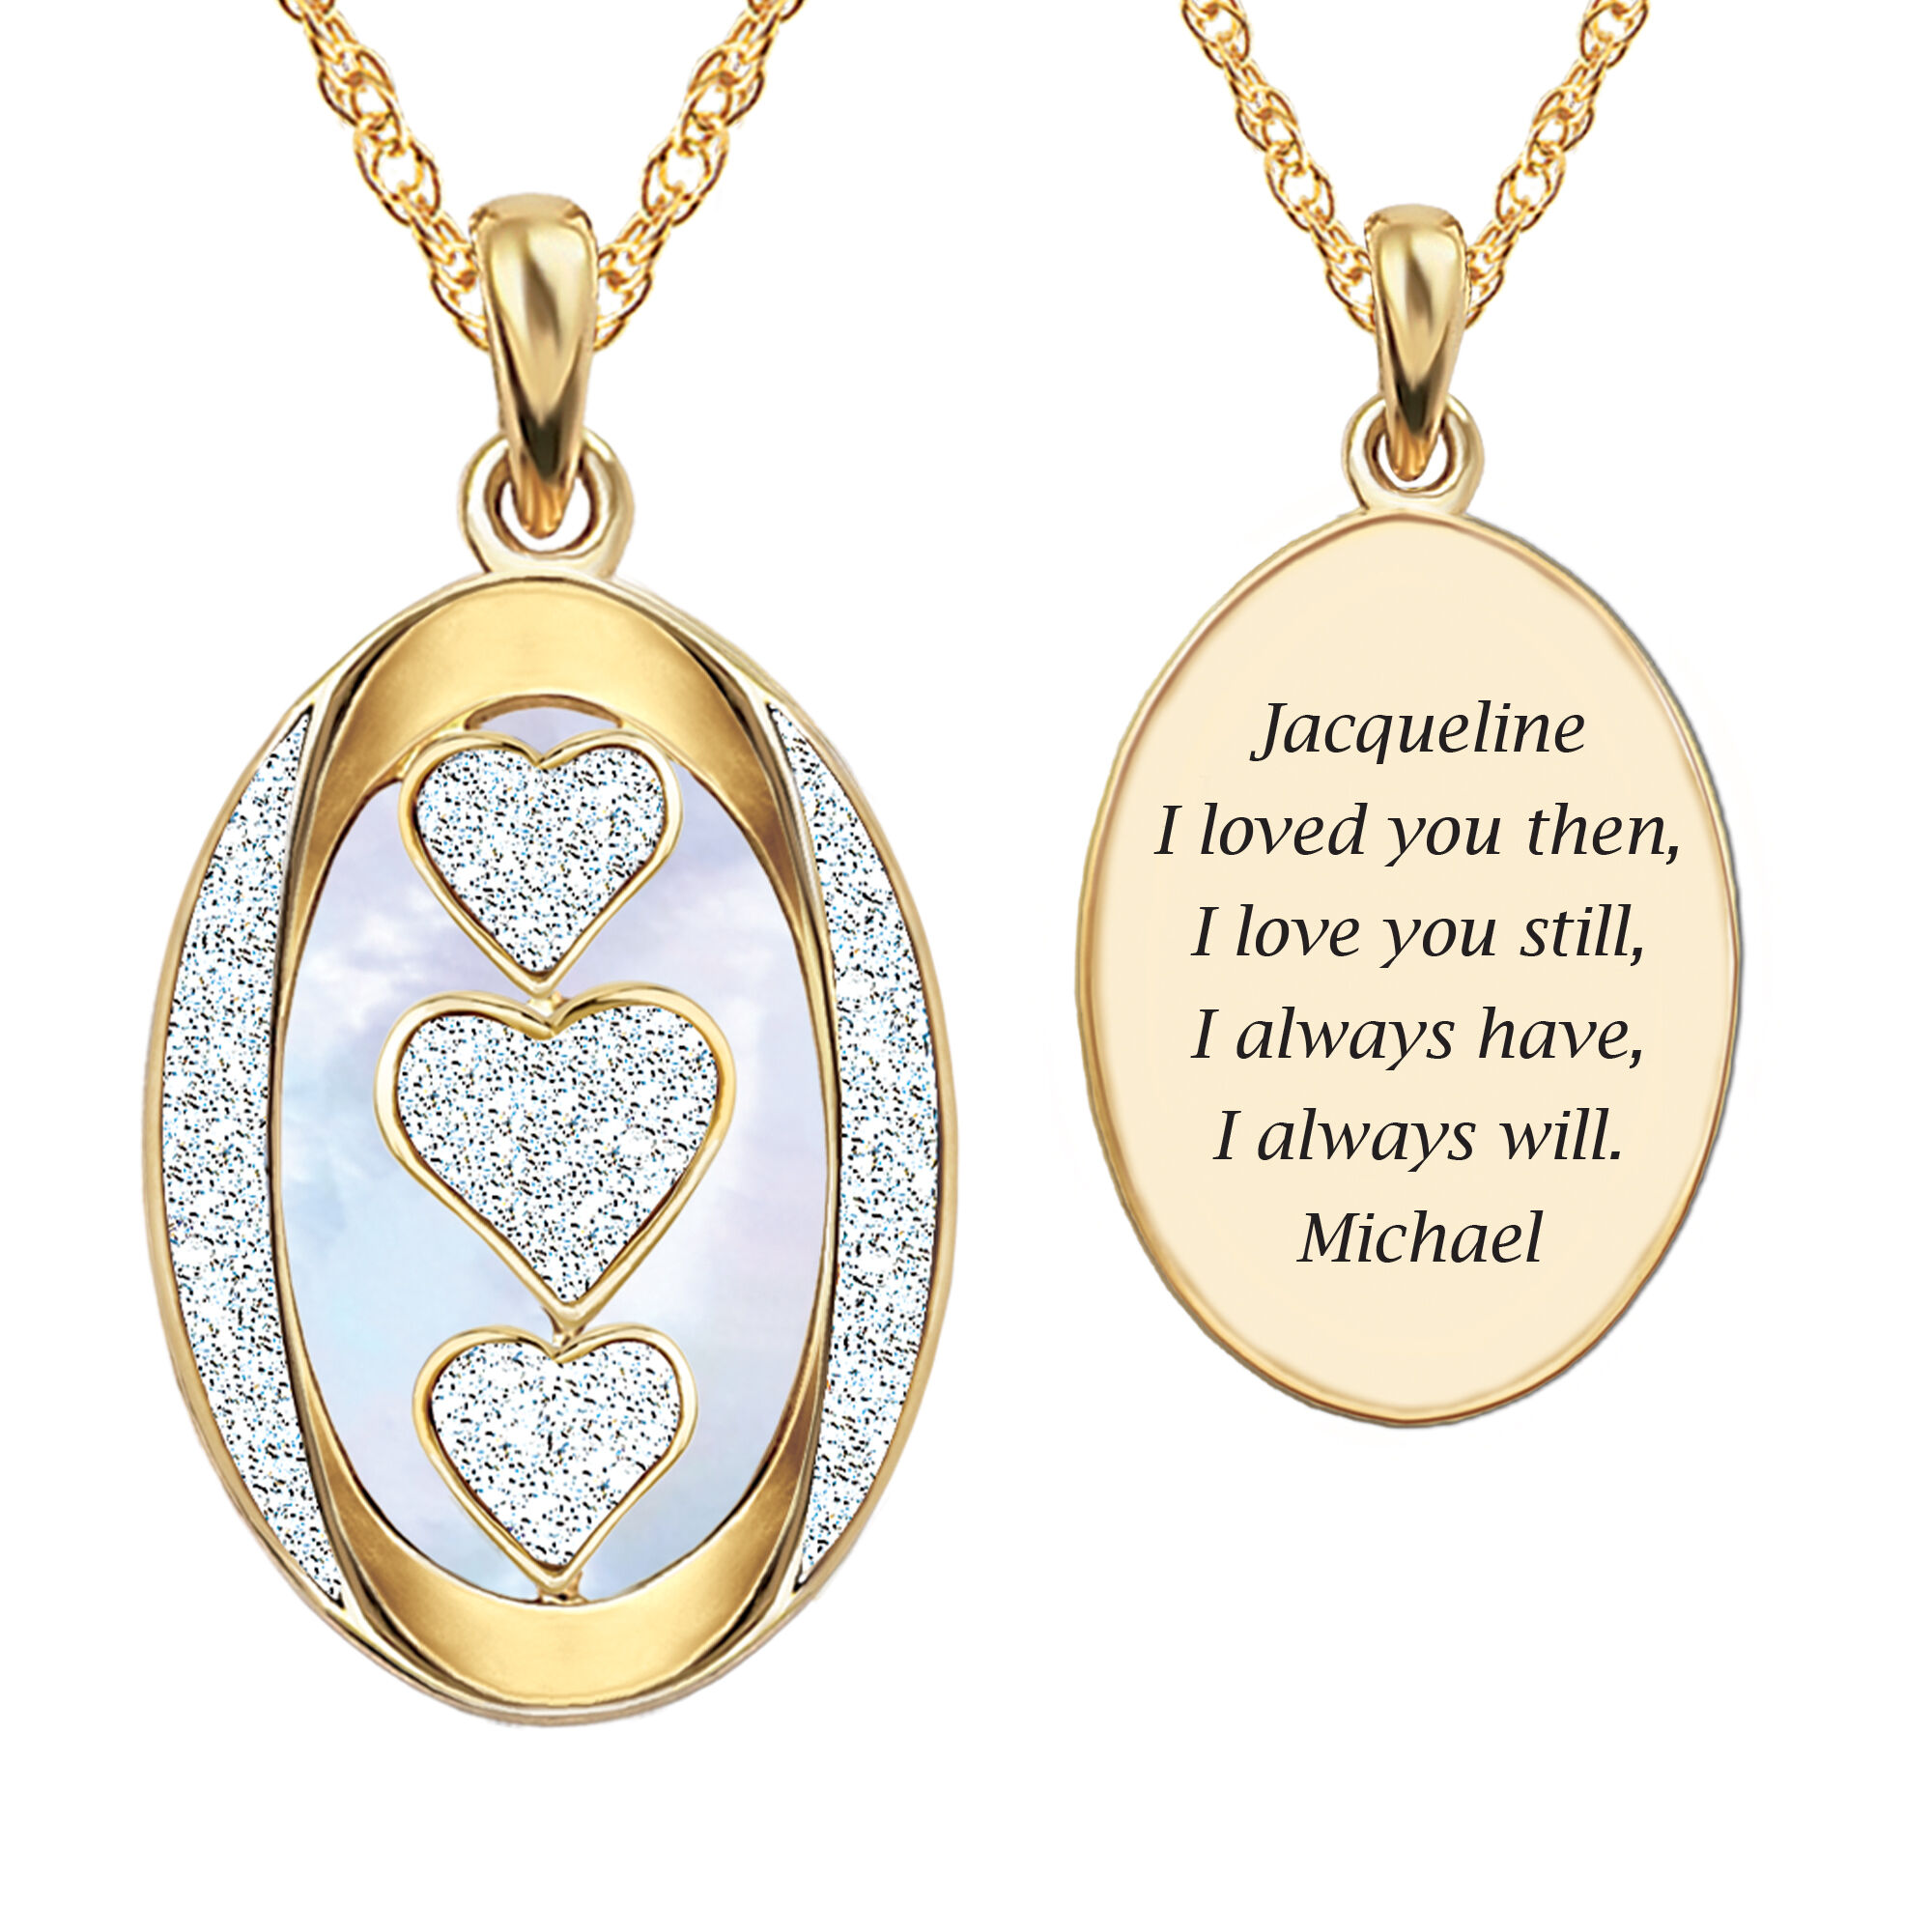 I Love You Personalized Diamond Pendant with FREE Matching Earrings 5238 0060 b pendant